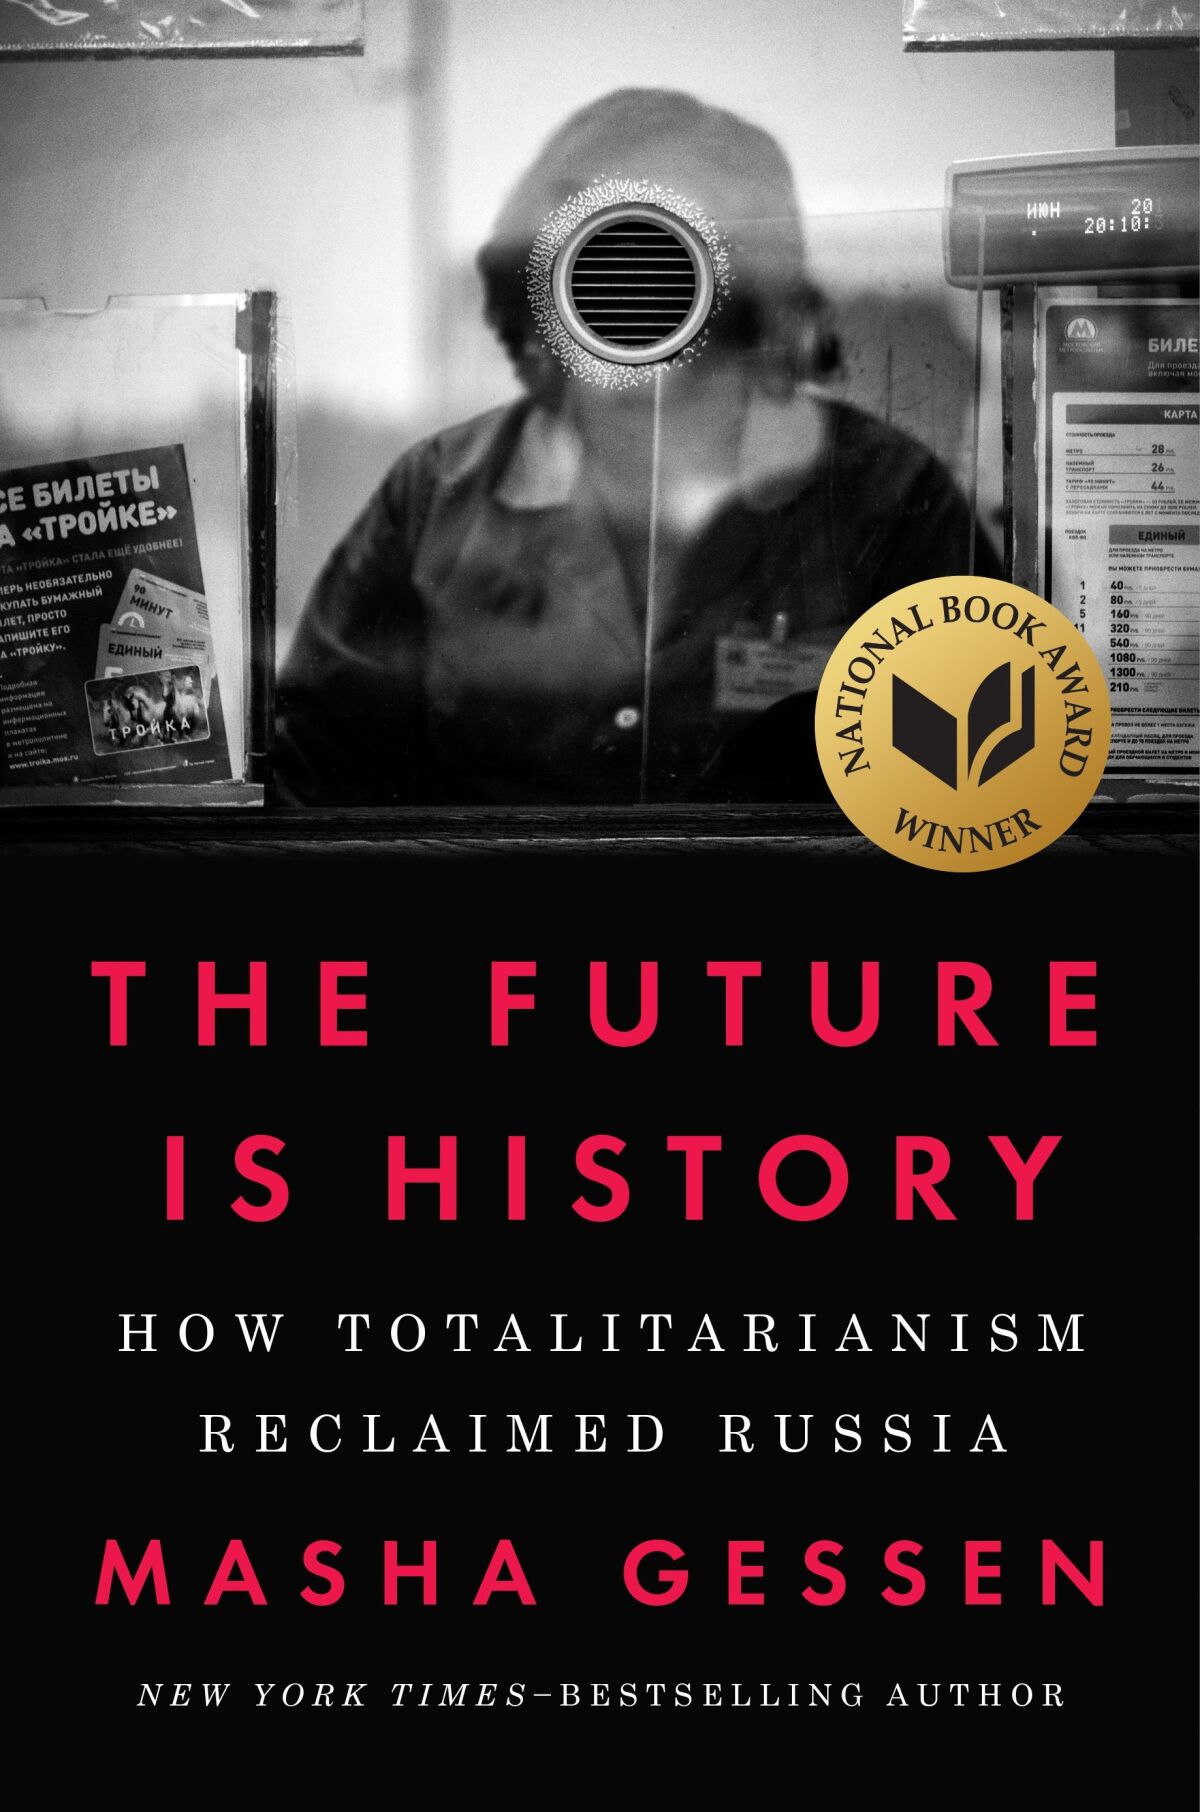 The cover of "The Future Is History" 